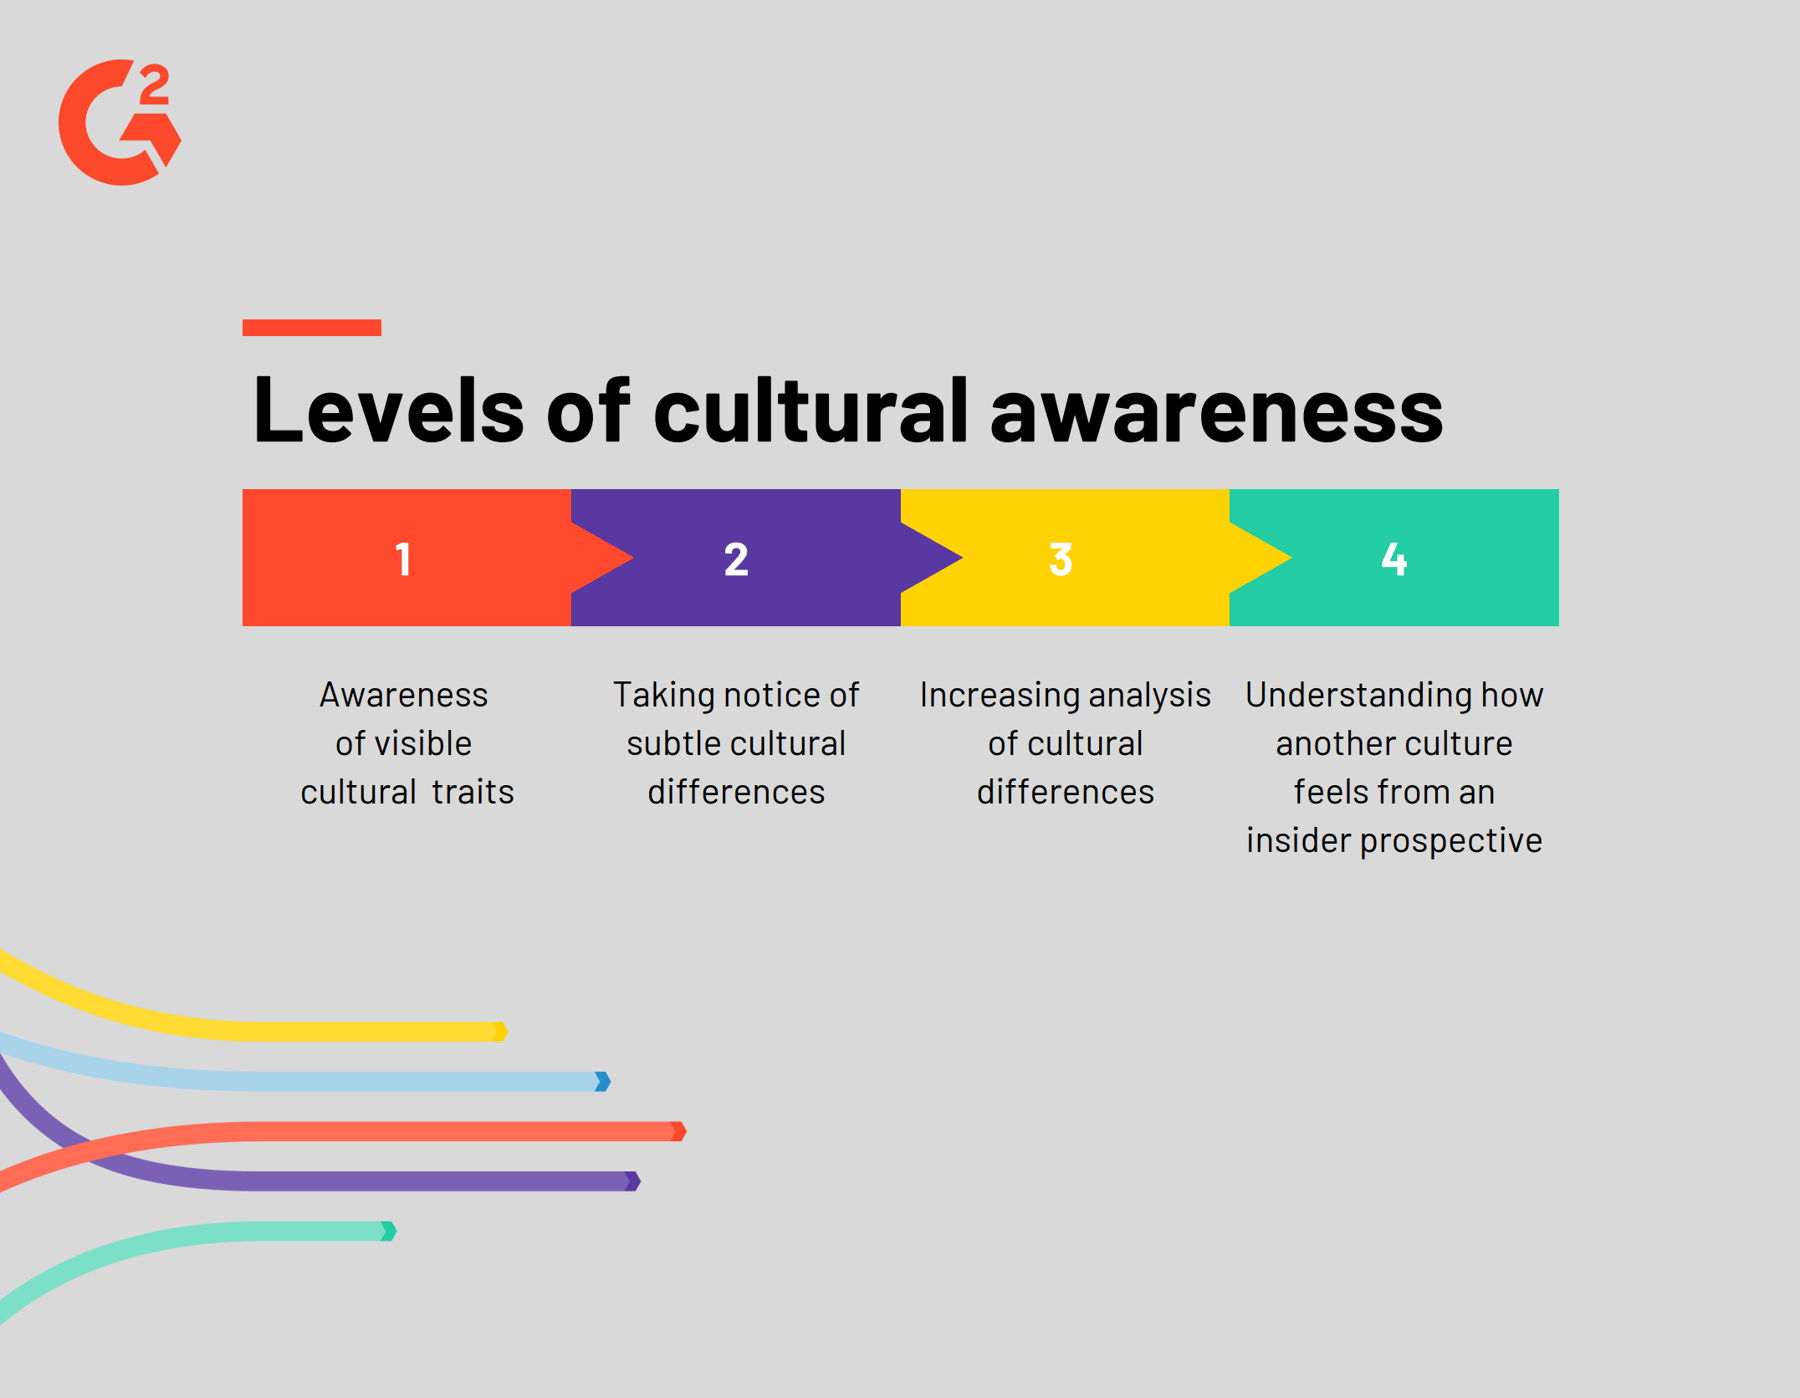 PR Experts Weigh In on Why Cultural Awareness is Crucial